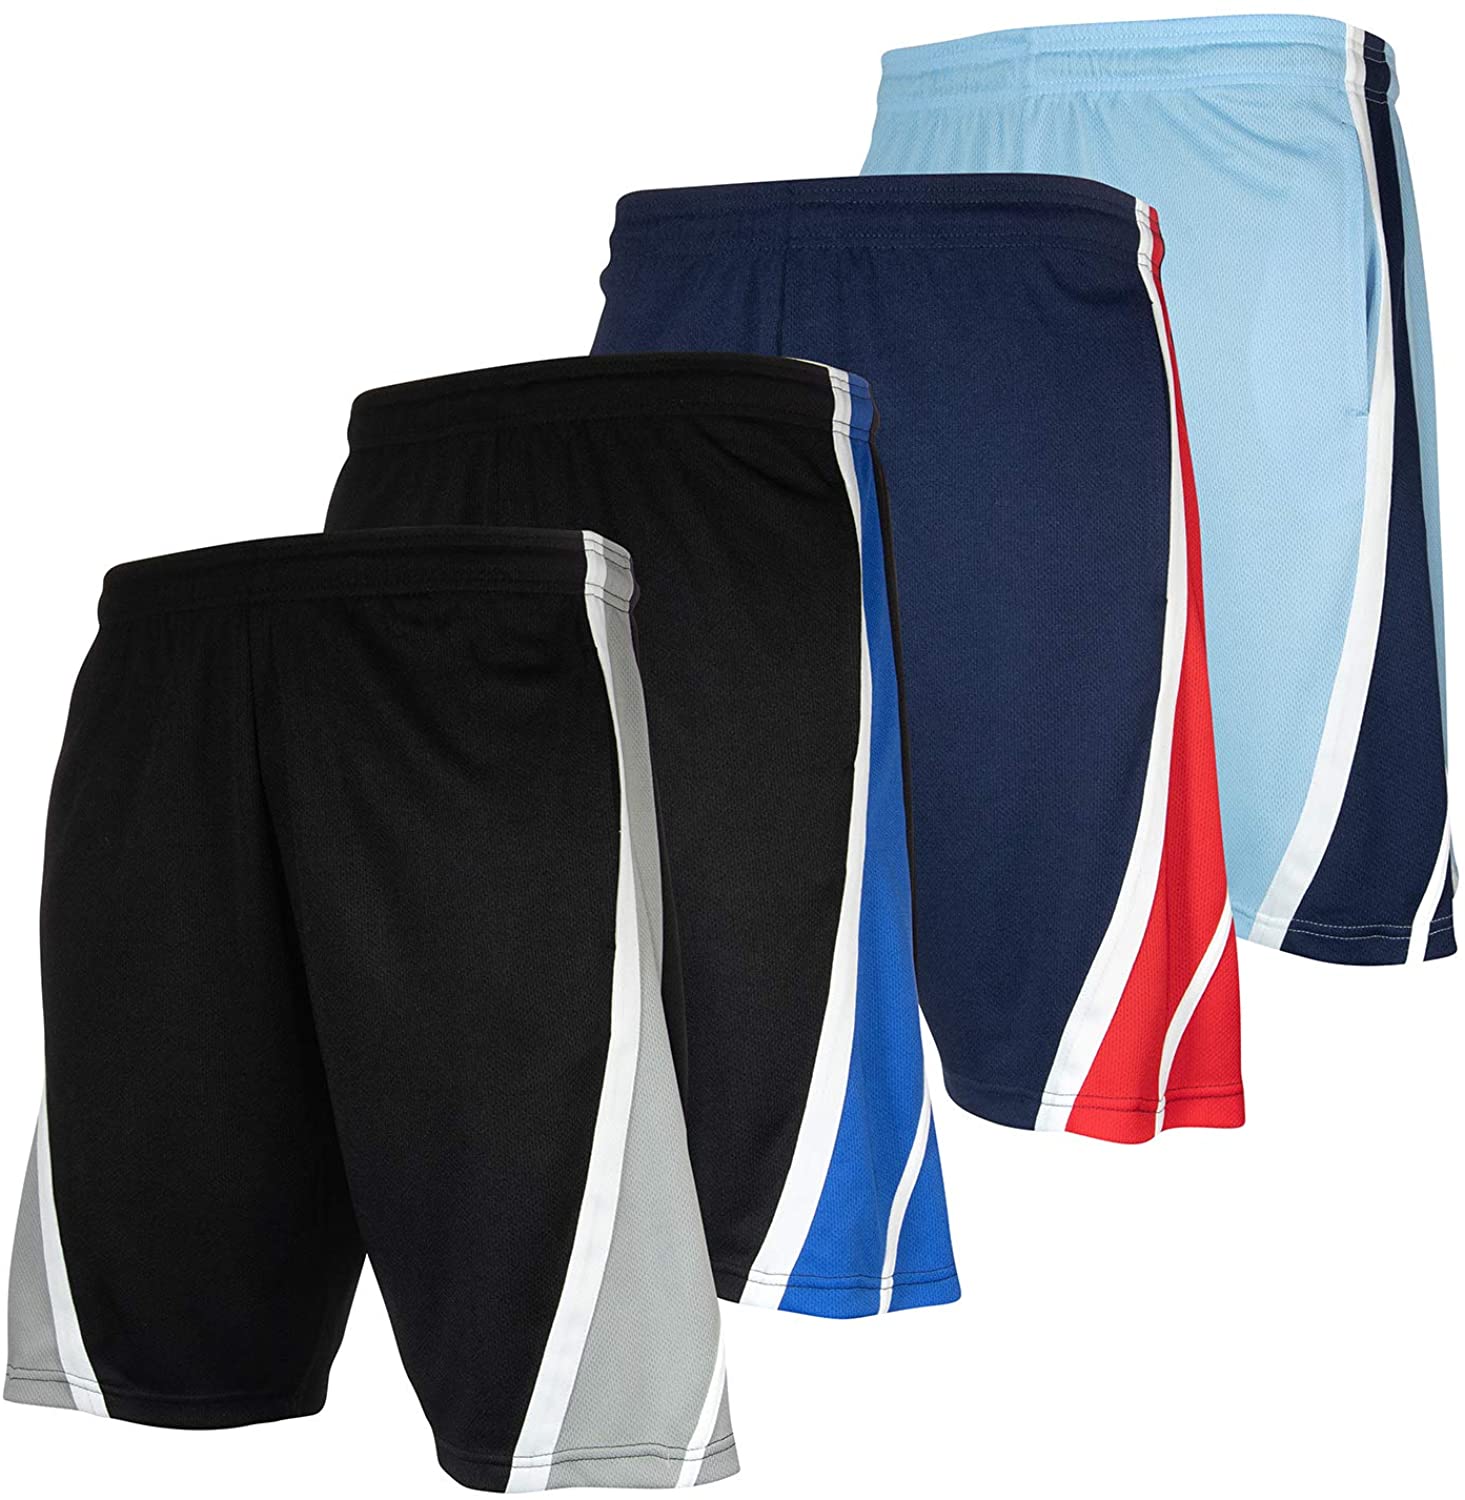 4 Pack Sports and Exercise Athletic Performance Fitness High Energy Long Basketball Shorts for Men 